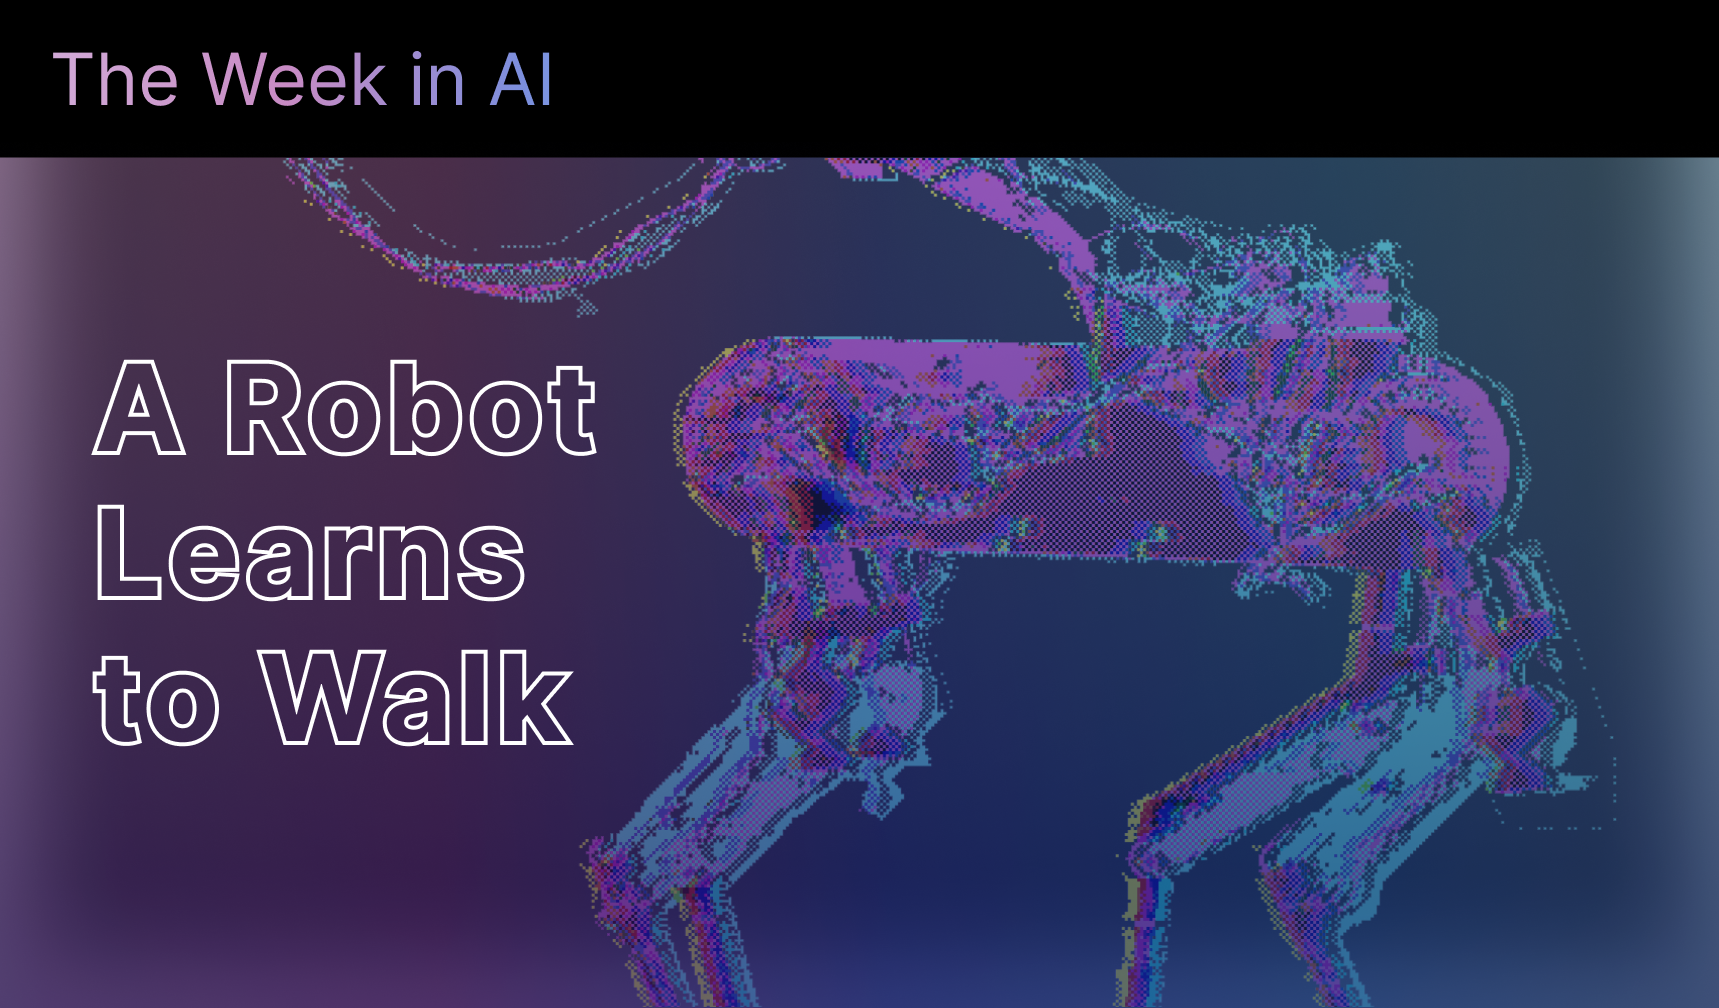 The Week in AI: A Robot Learns to Walk, an AI Sees Like Humans, Project AirSim Improves Drone Training, and More